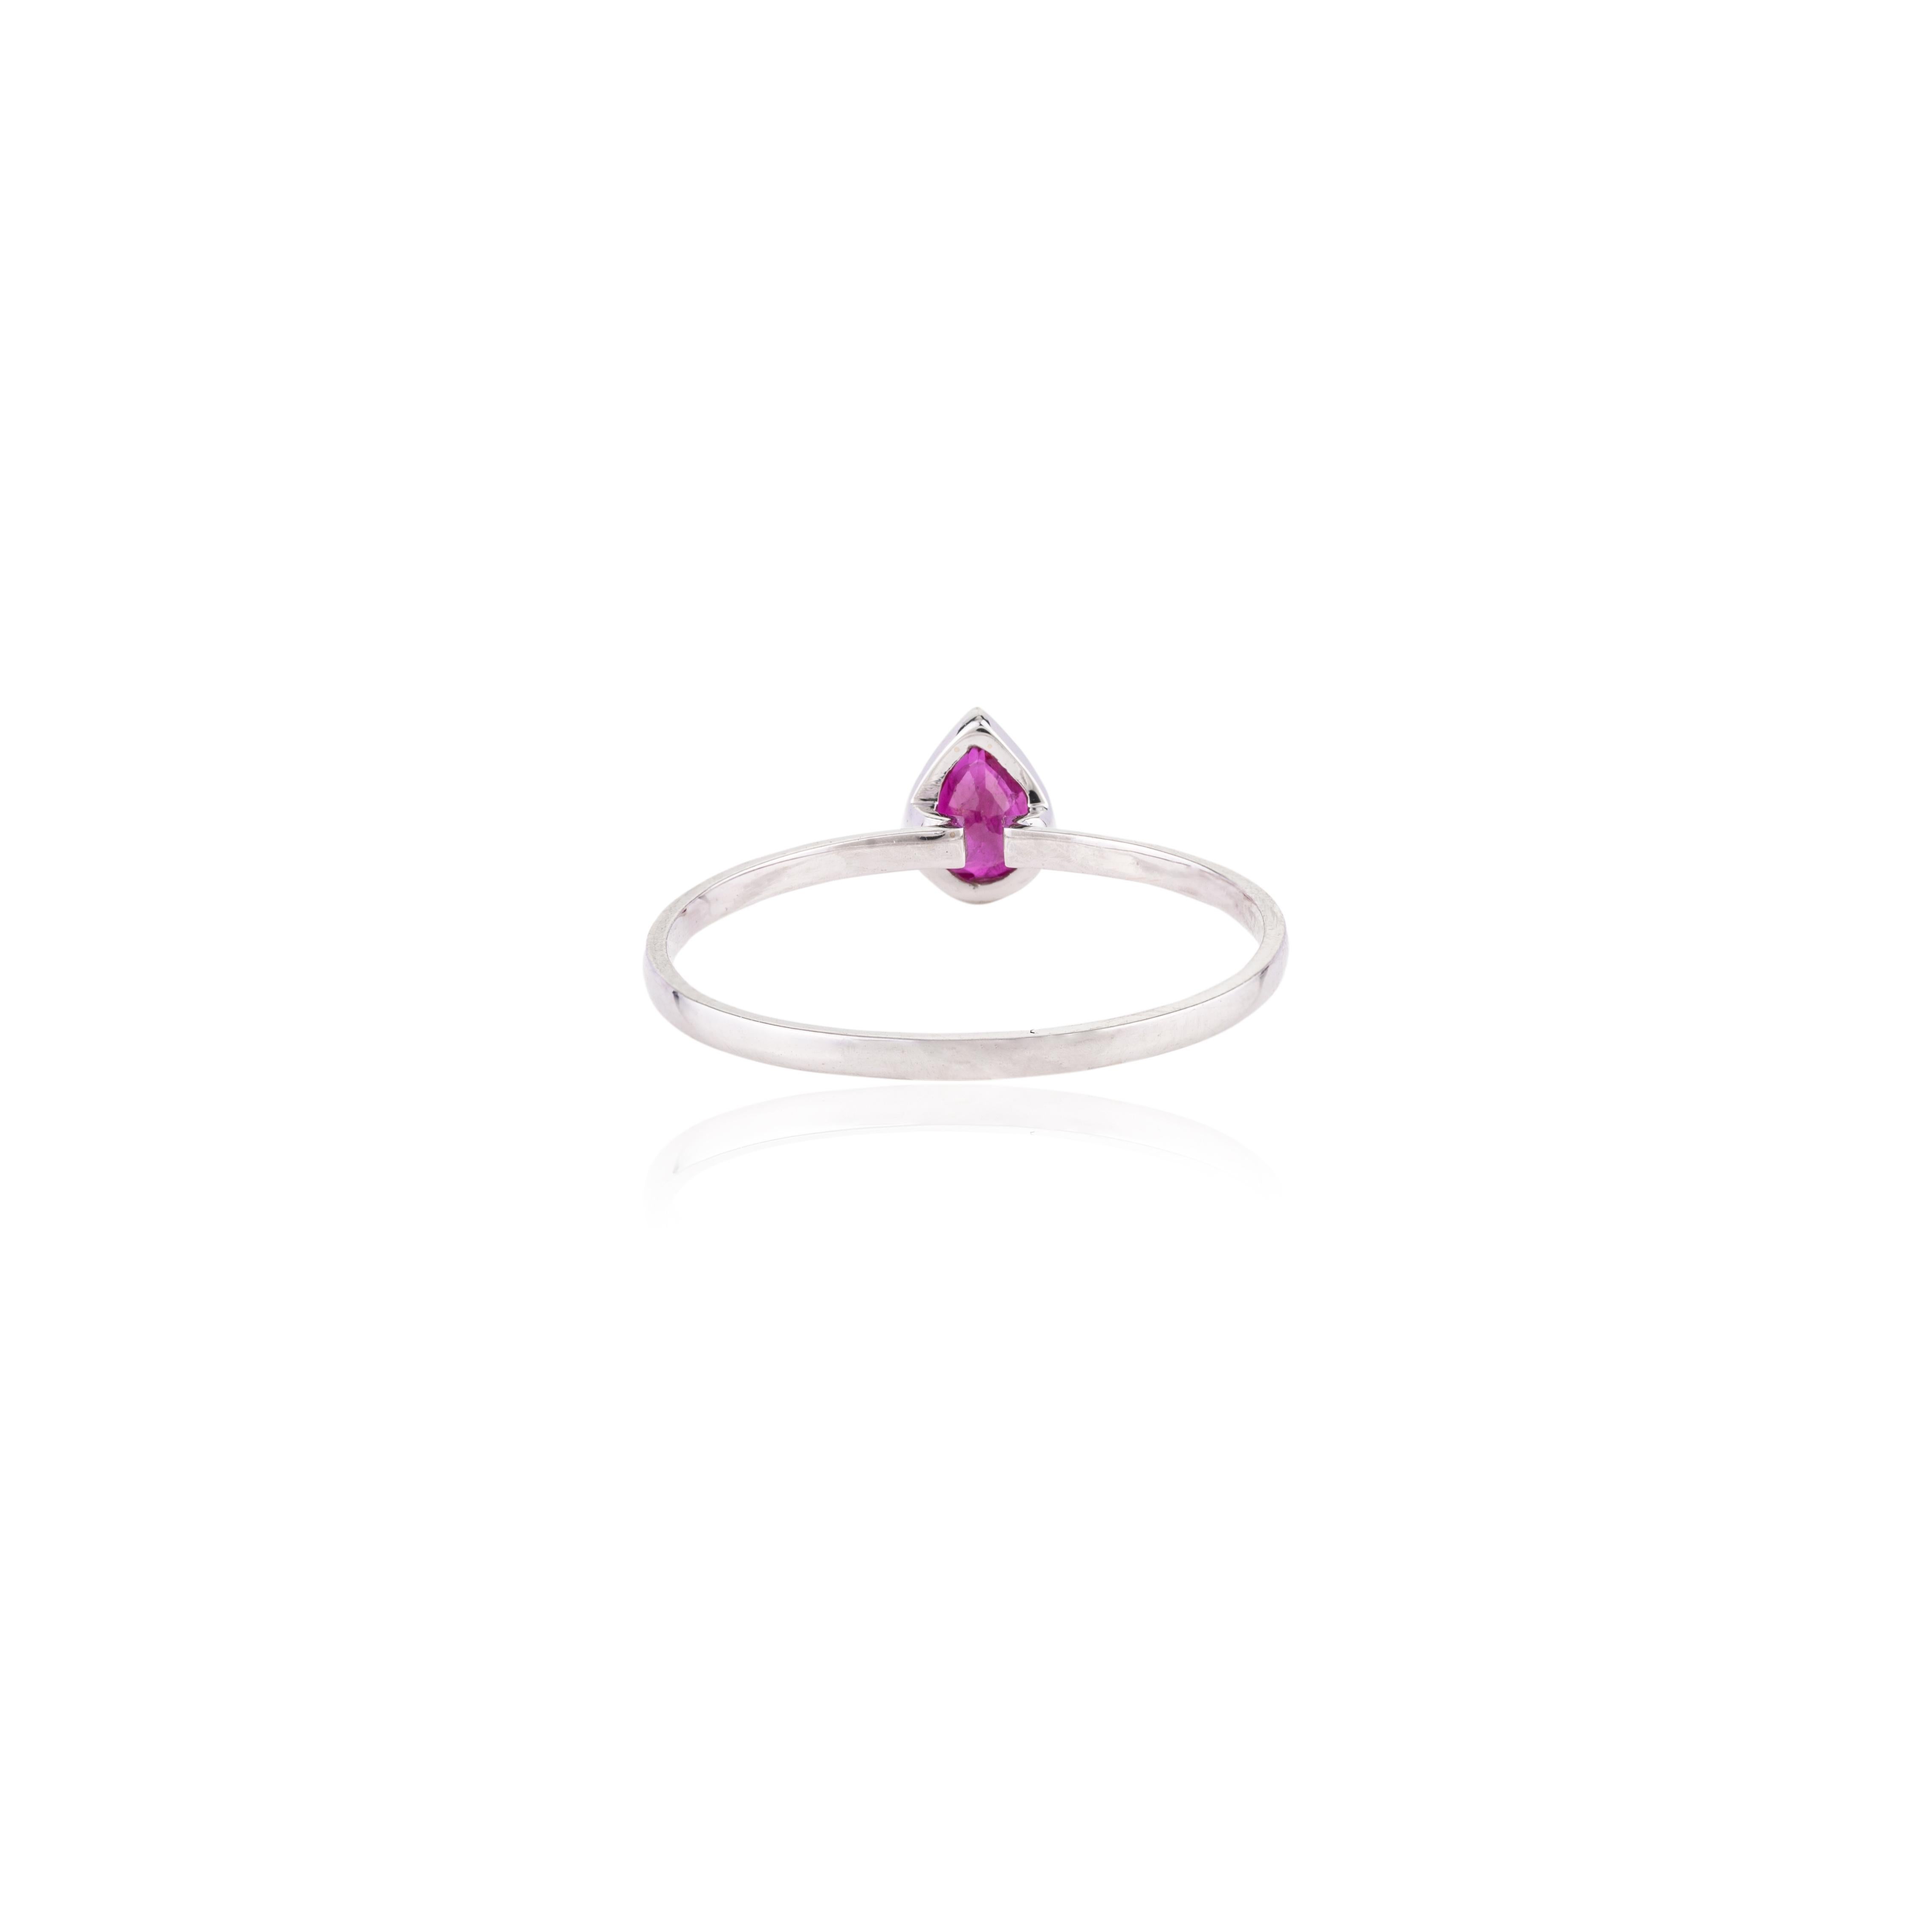 For Sale:  Solid 18k White Gold Dainty Pear Ruby Solitaire Ring for Her 6